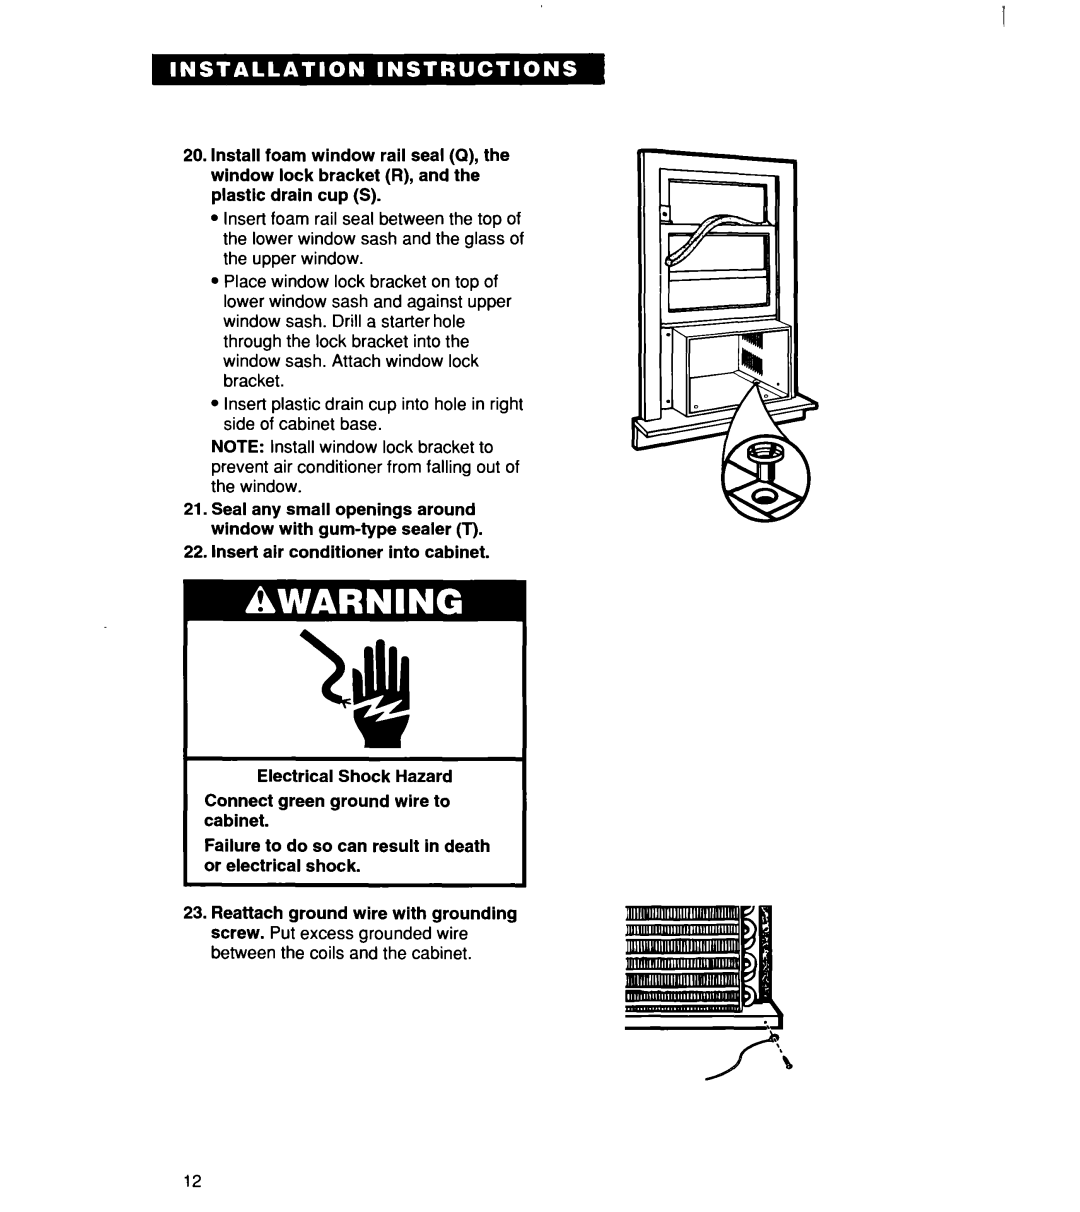 Whirlpool ACM 152XE0, ACM244XE0, ACM184XE0 important safety instructions insert air conditioner into cabinet 